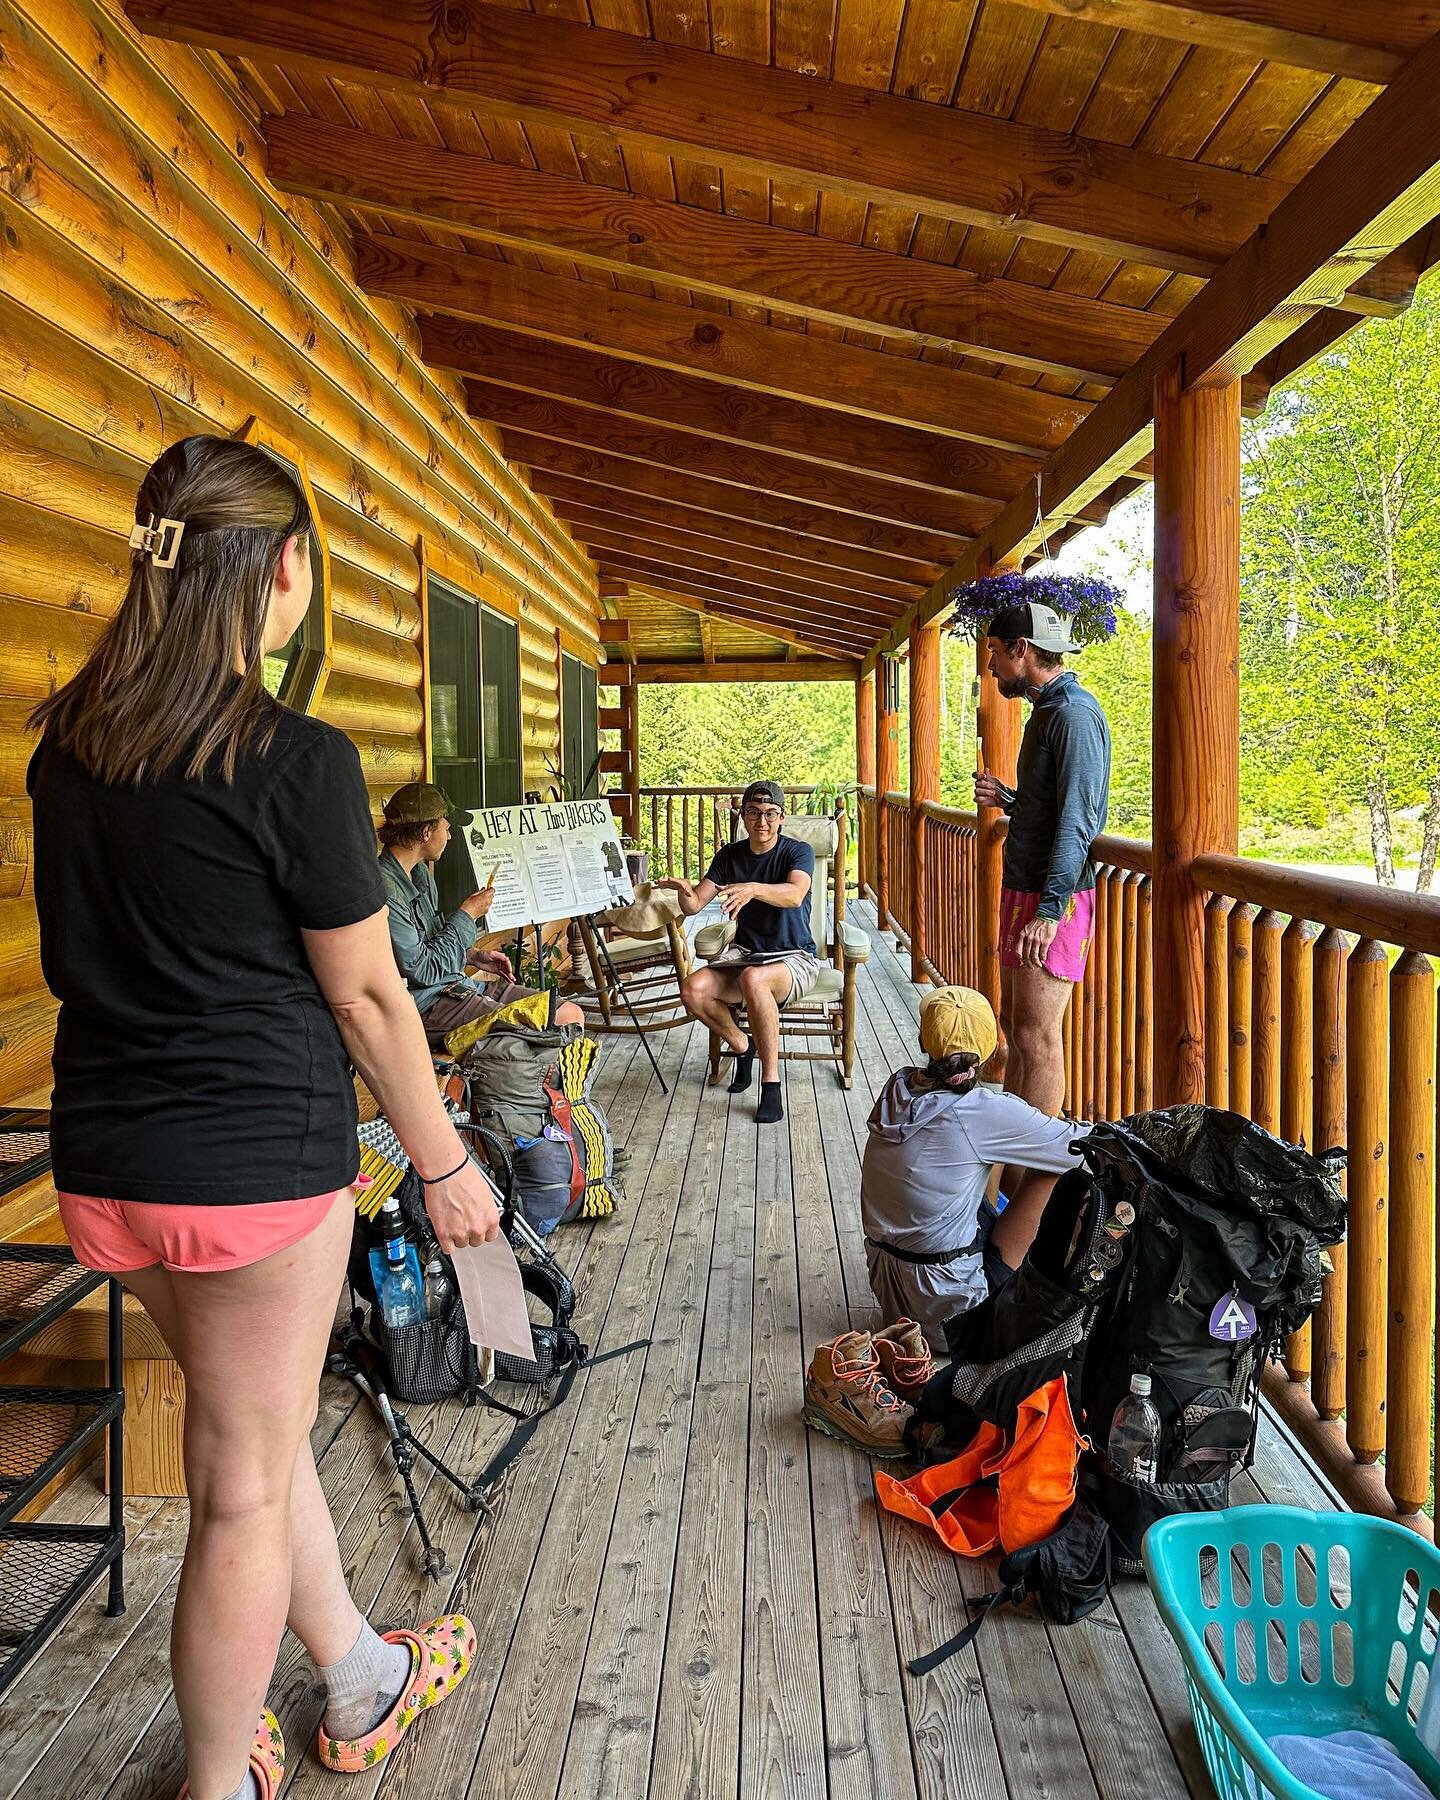 The 2023 Thru Hiker season is officially in session and we are STOKED to provide our HoME for the AT community this summer. If you know anyone hiking the trail, please let them know that HoME is ready to welcome them with open arms! 

#hikershike #ap